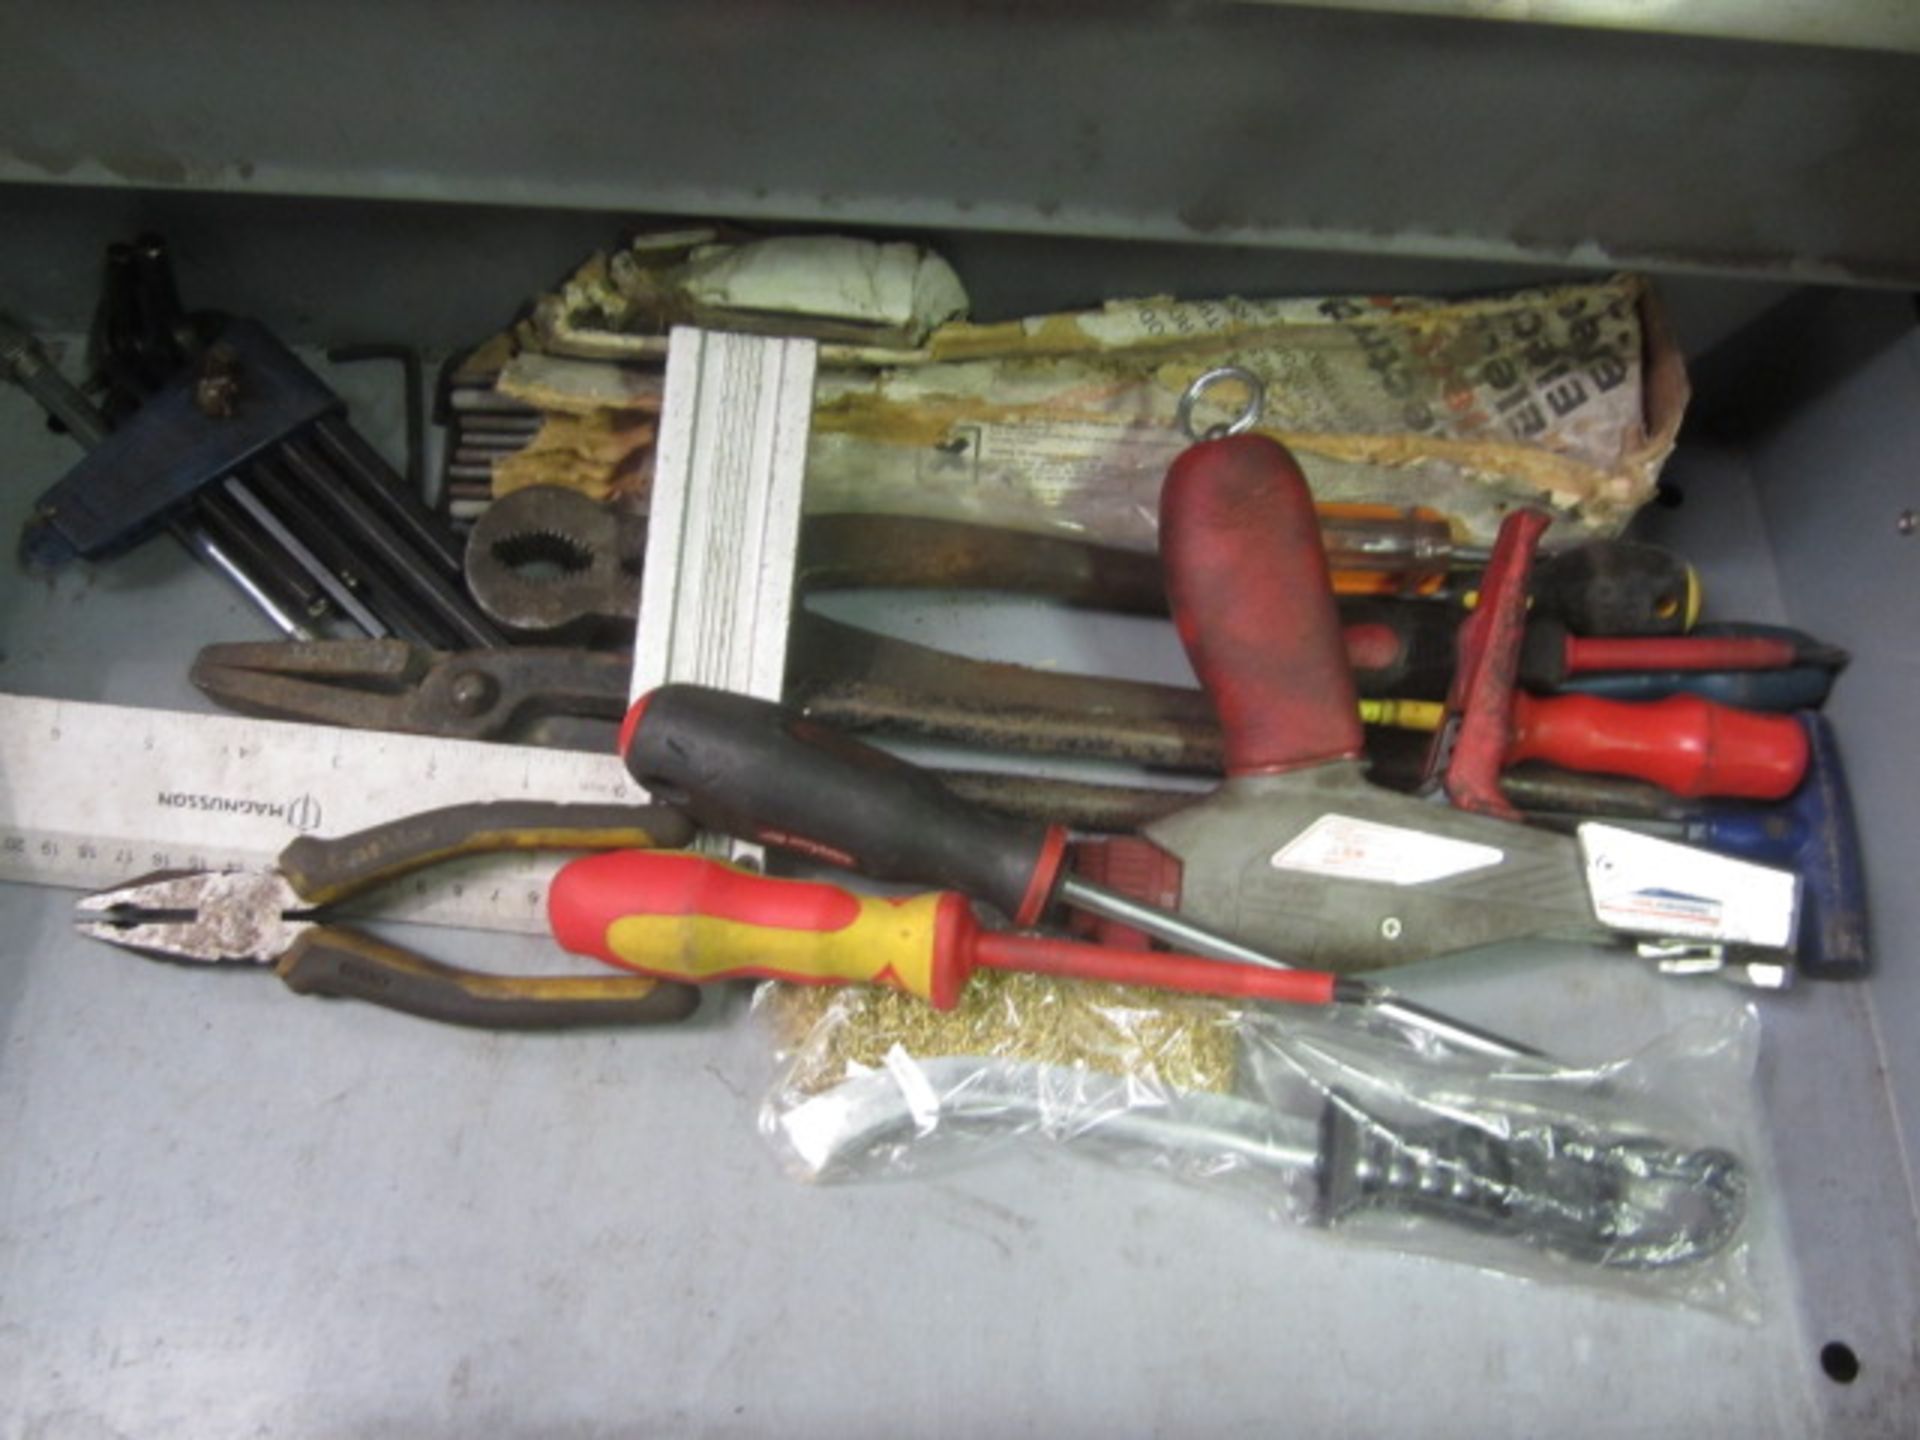 American Pro 4 drawer tool cabinets with contents of assorted hantools, drill bits, chisels, - Image 5 of 8